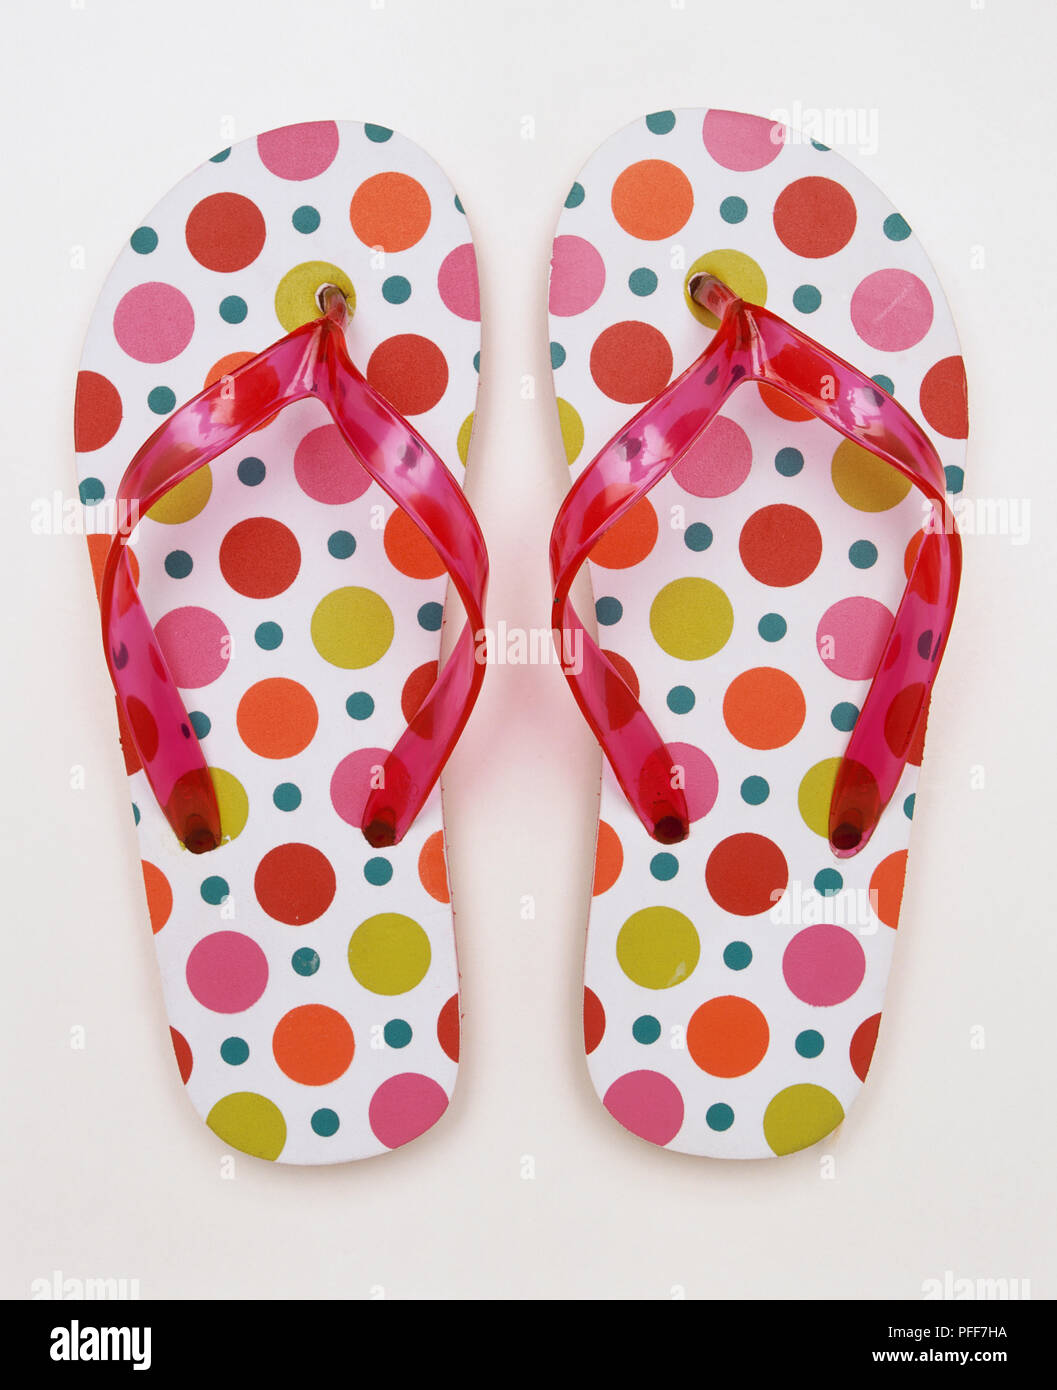 A pair of flip-flops with pink plastic bands and dotted soles. Stock Photo